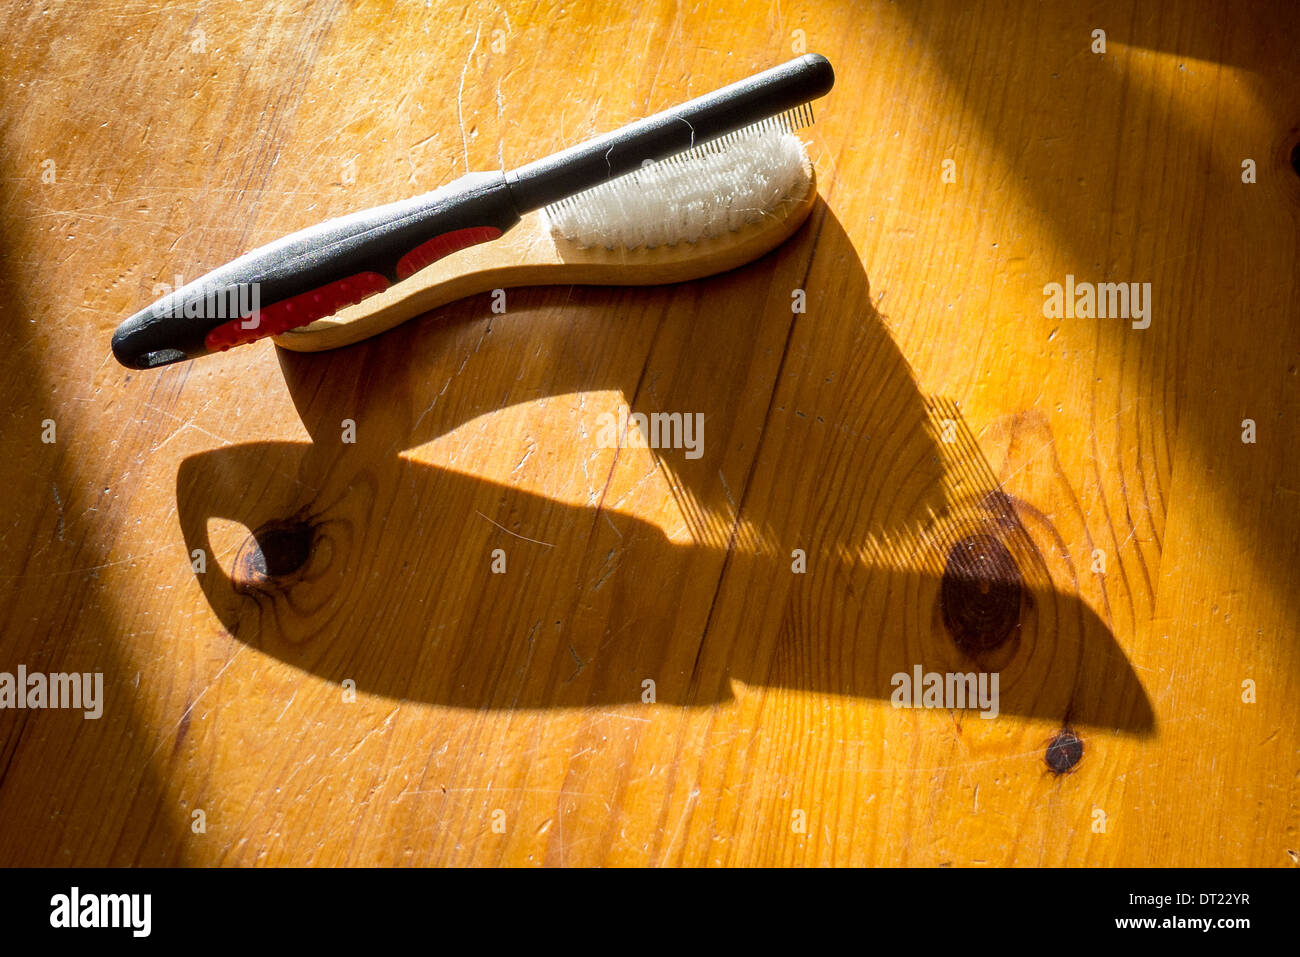 Brush and comb for grooming pet cats or dogs Stock Photo